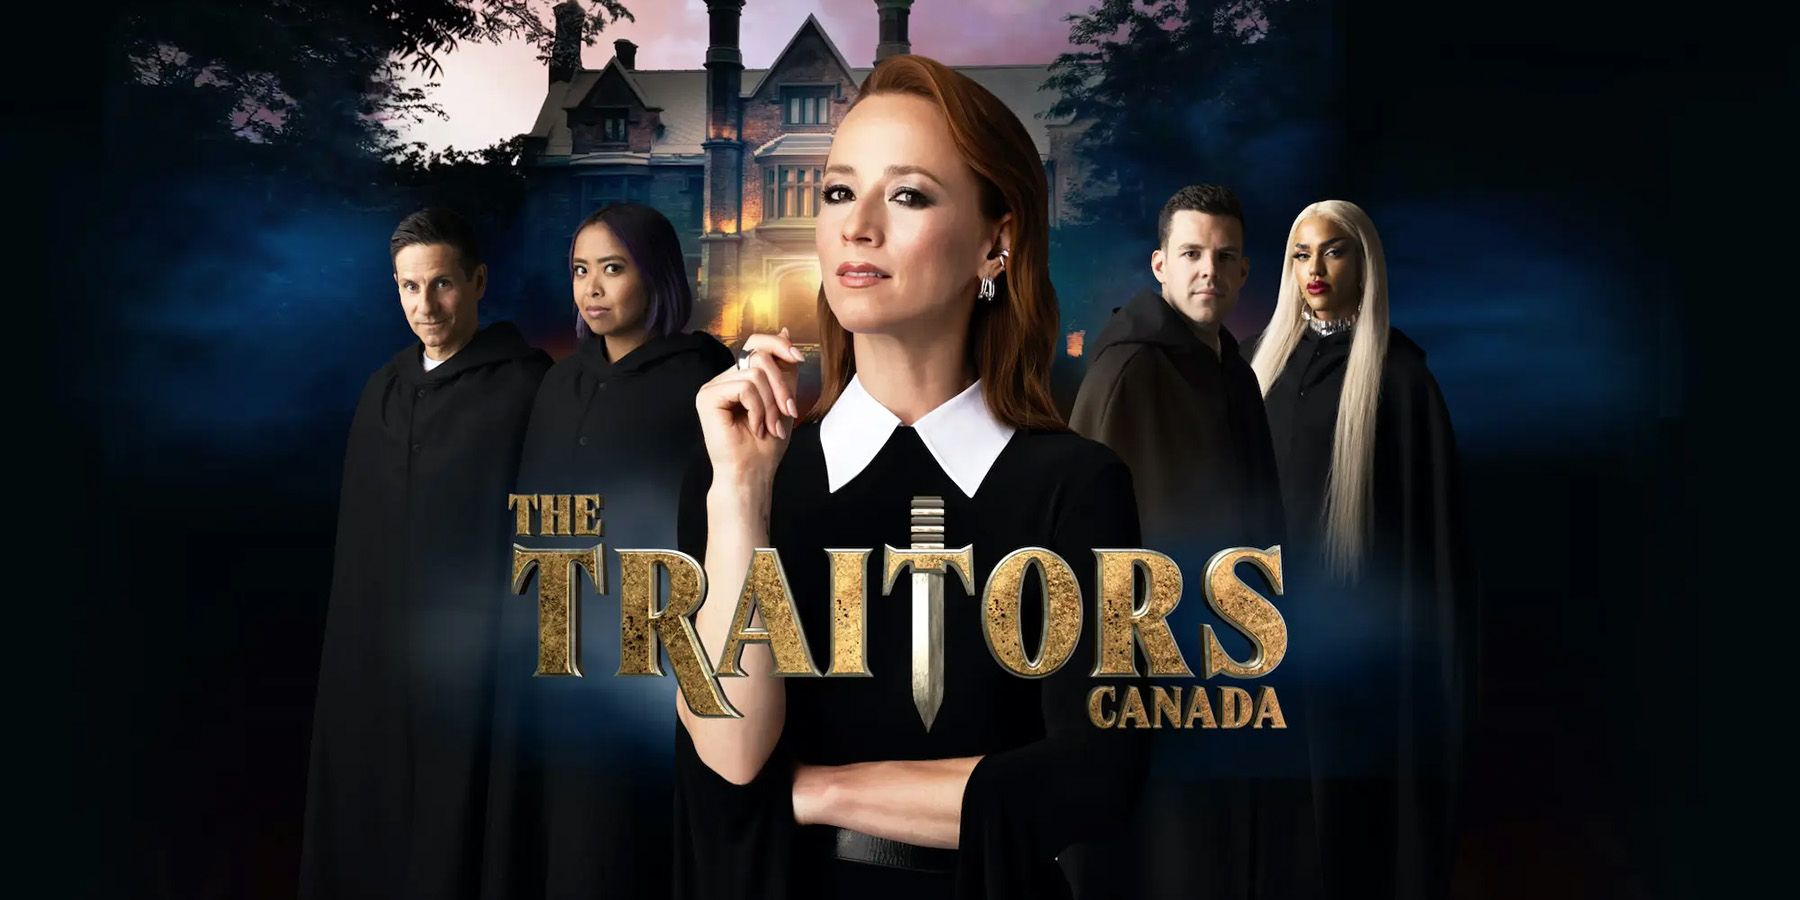 The Traitors Canada Season 1 promo poster with host and players